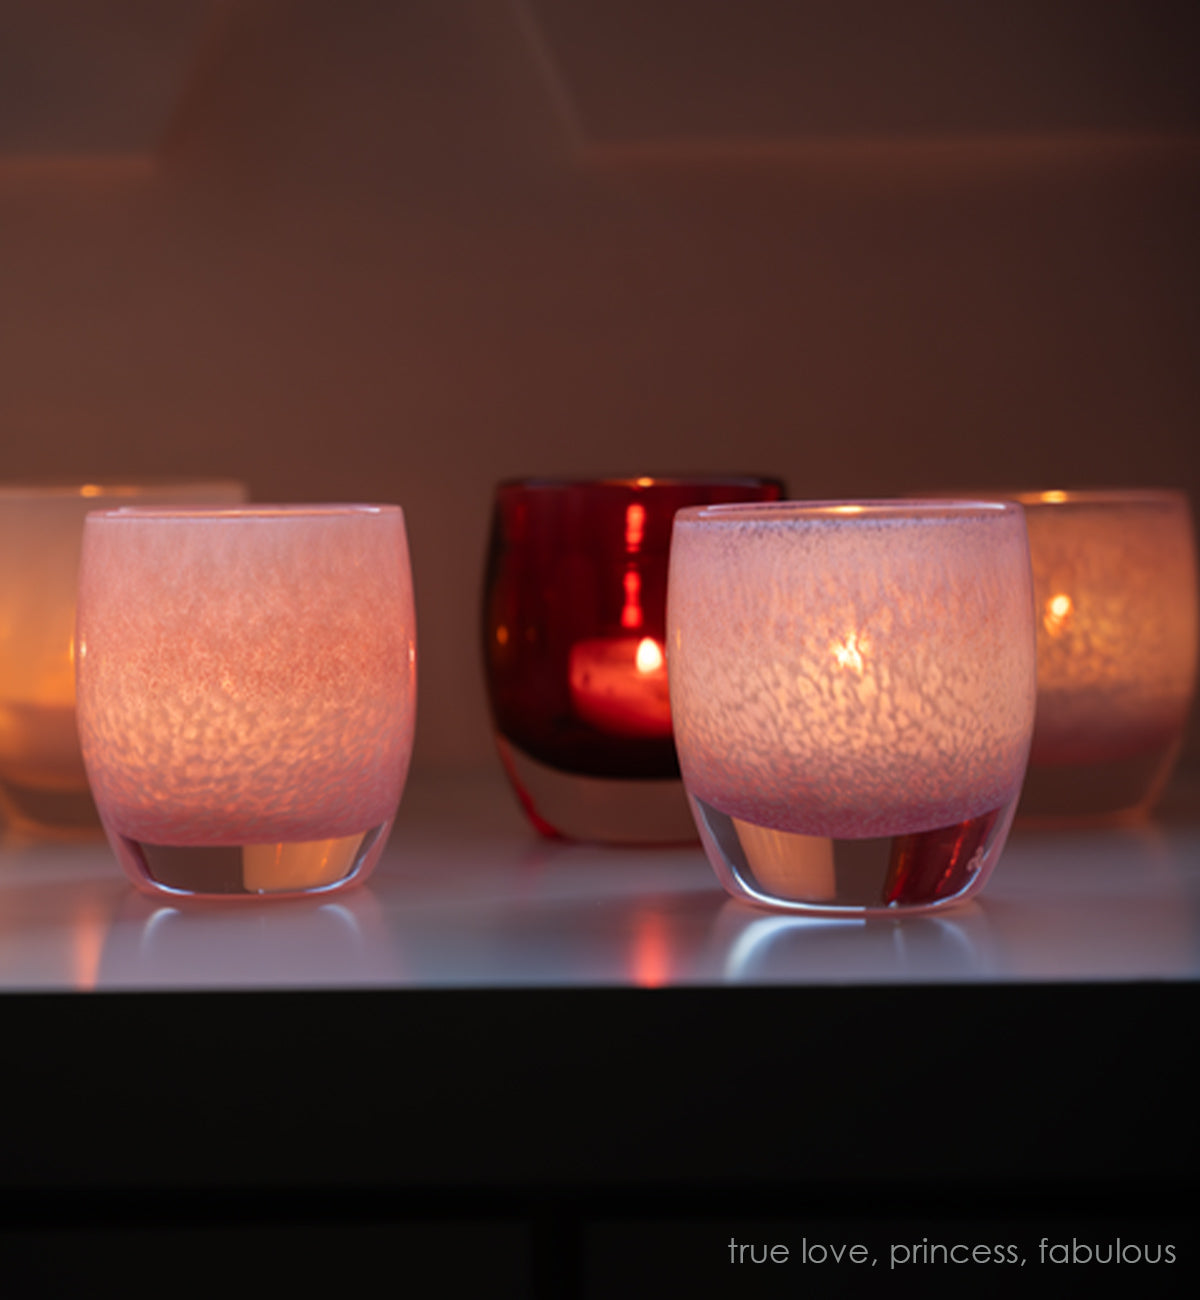 fabulous, pink textured hand-blown glass votive candle holders paired with true love and princess on a mantle.